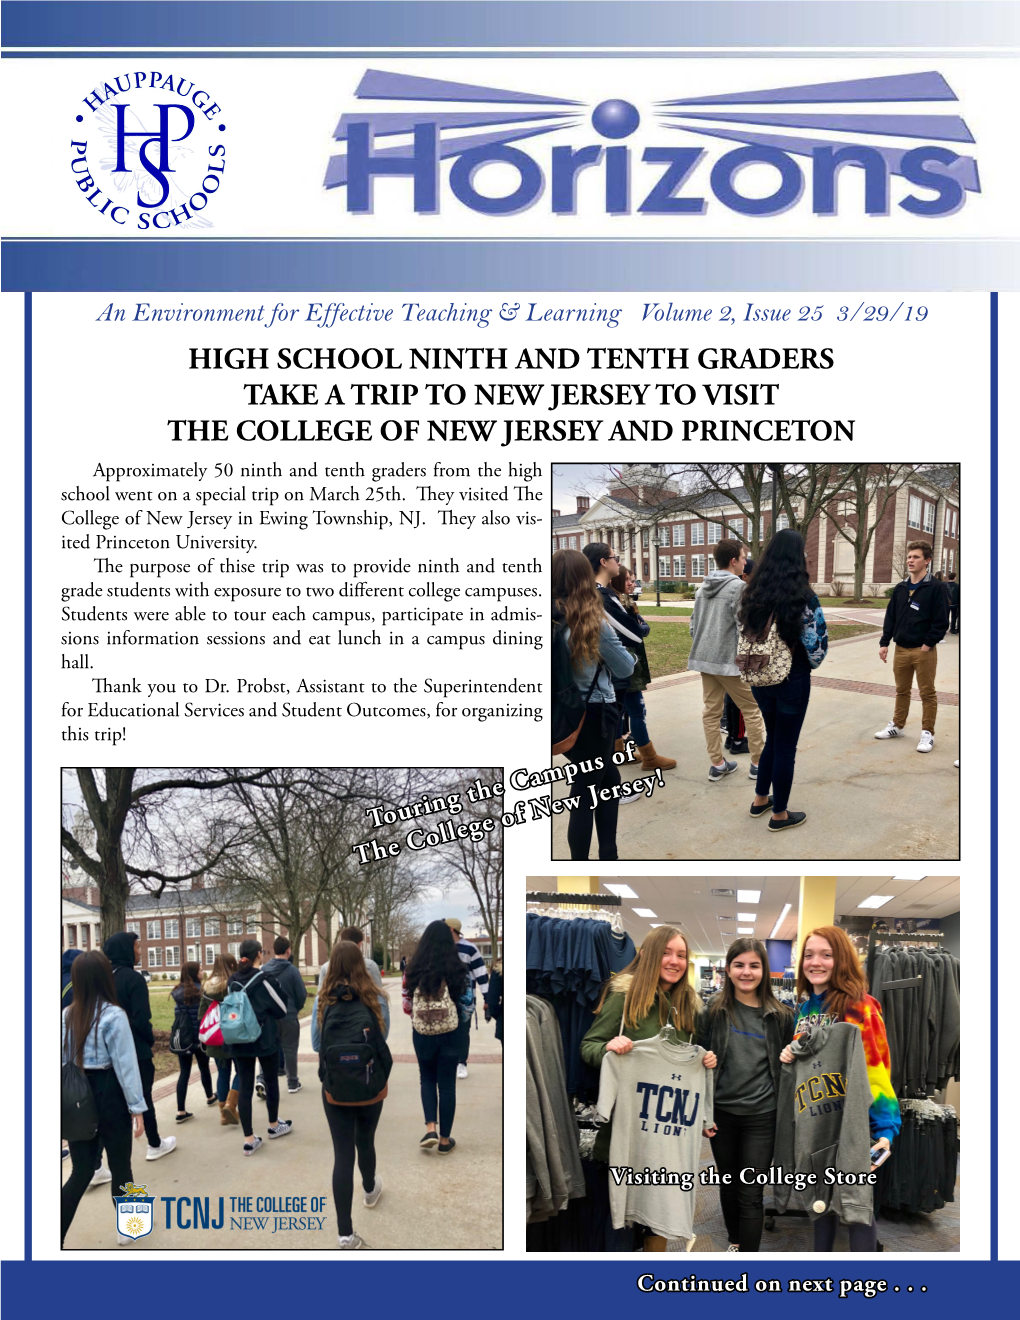 High School Ninth and Tenth Graders Take a Trip to New